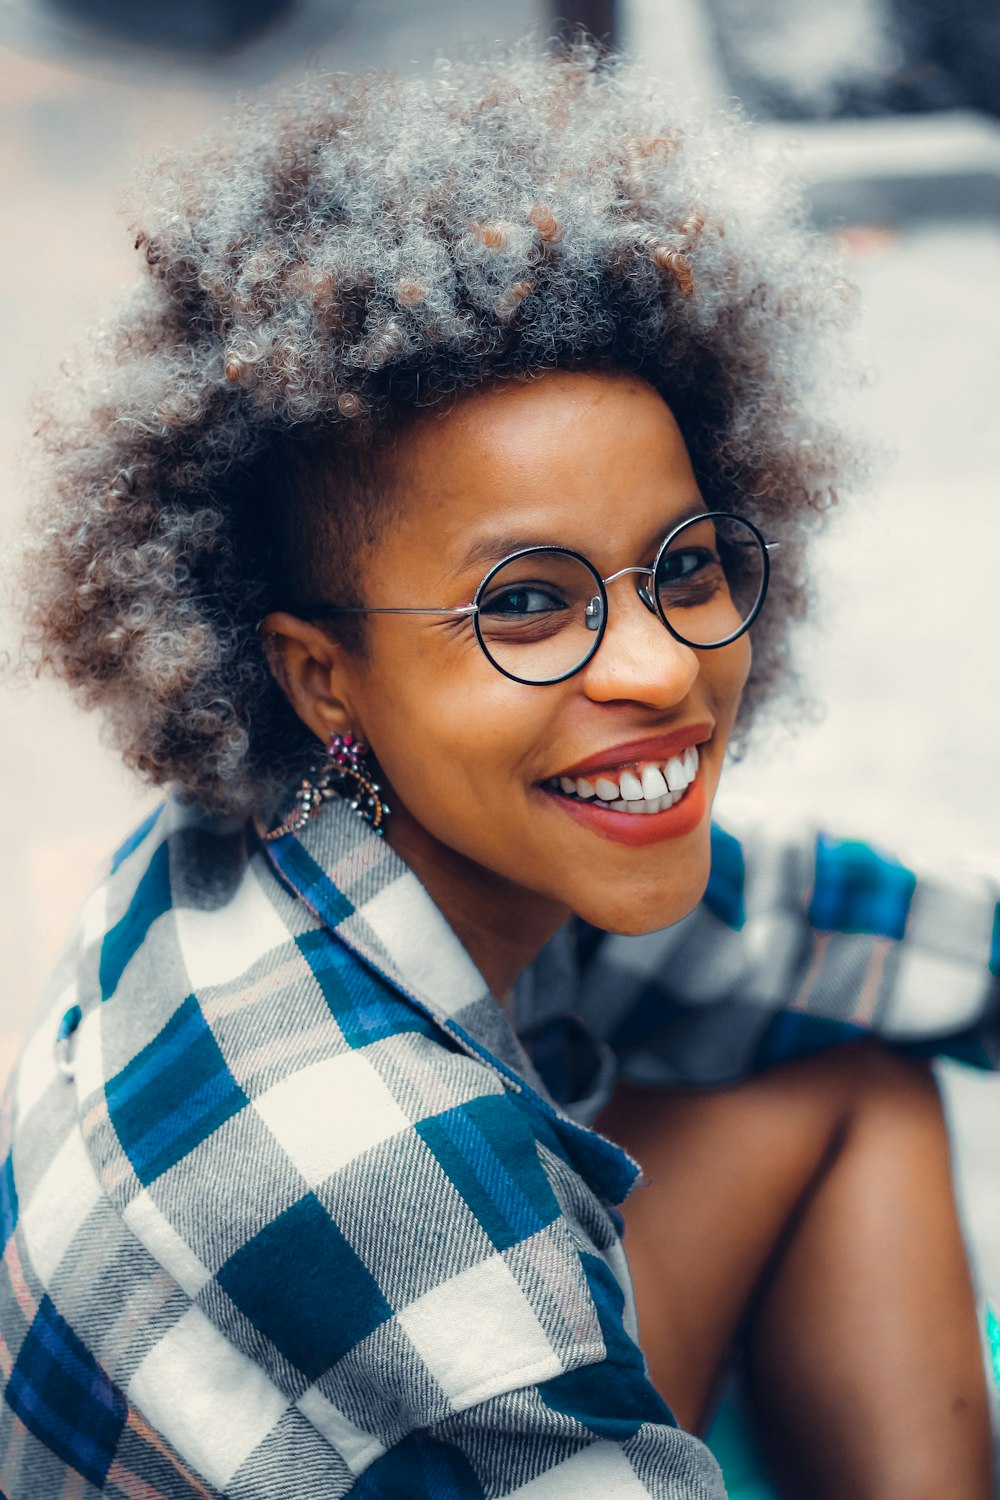 a woman wearing glasses and a plaid shirt